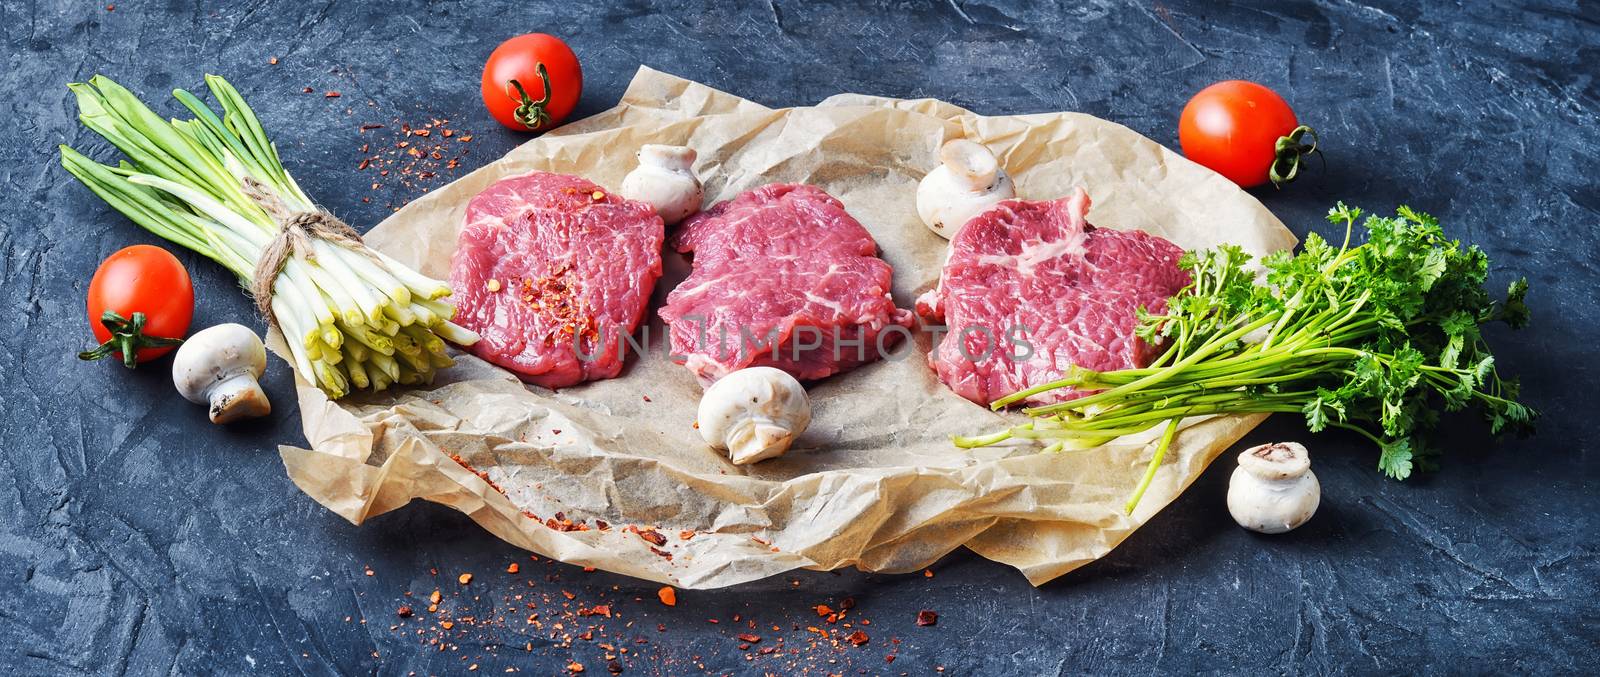 banner with fresh meat home beef by LMykola